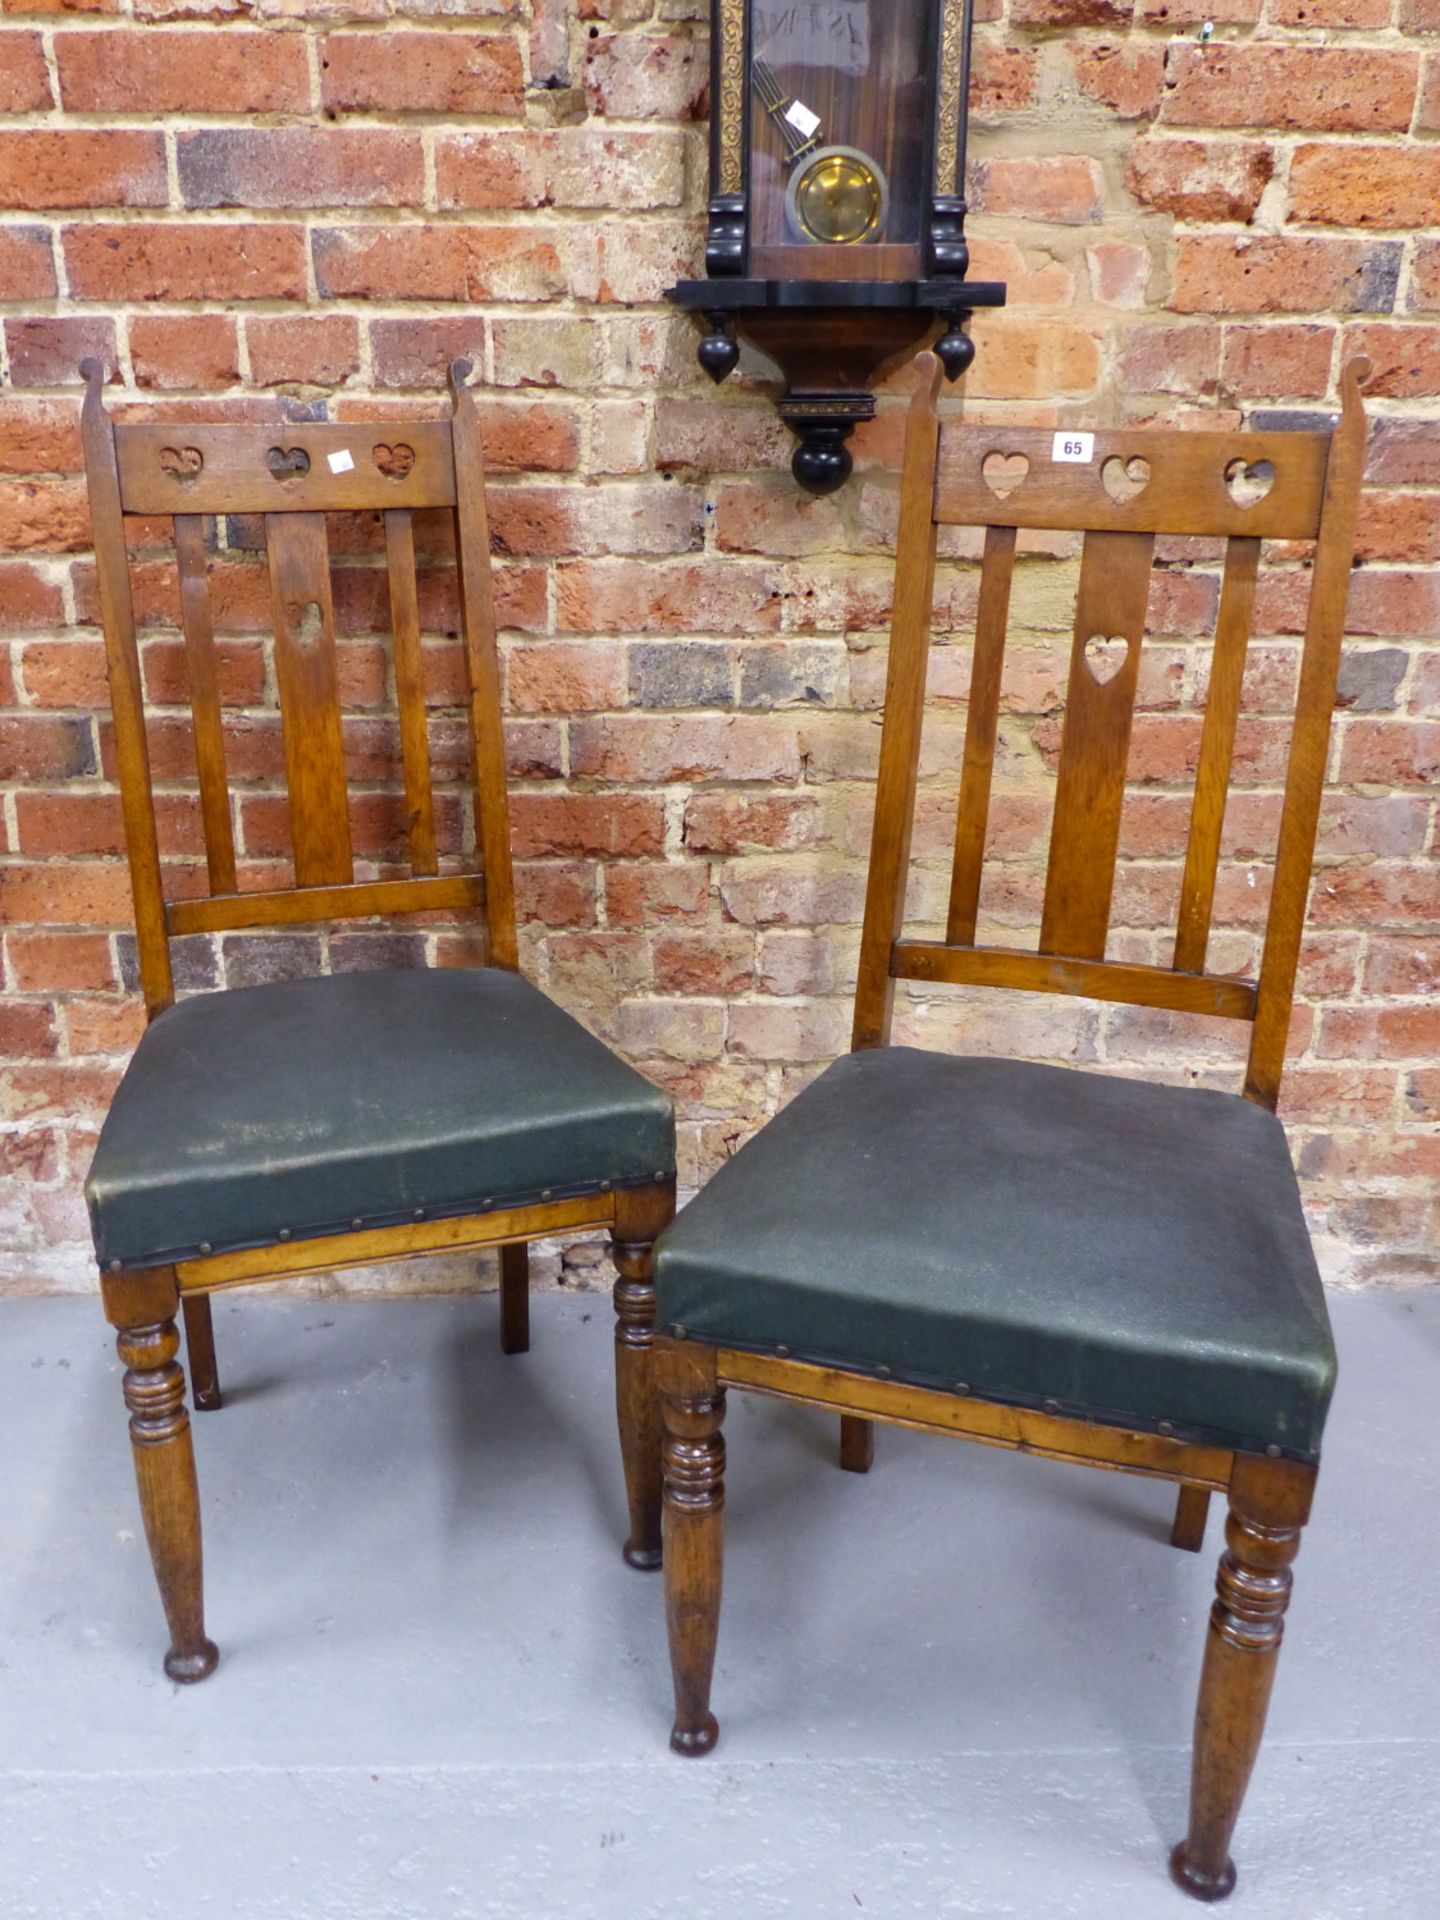 A PAIR OF EARLY 20th CENTURY ARTS AND CRAFTS STYLE OAK DINING CHAIRS WITH PIERCED HEART BACKS AND